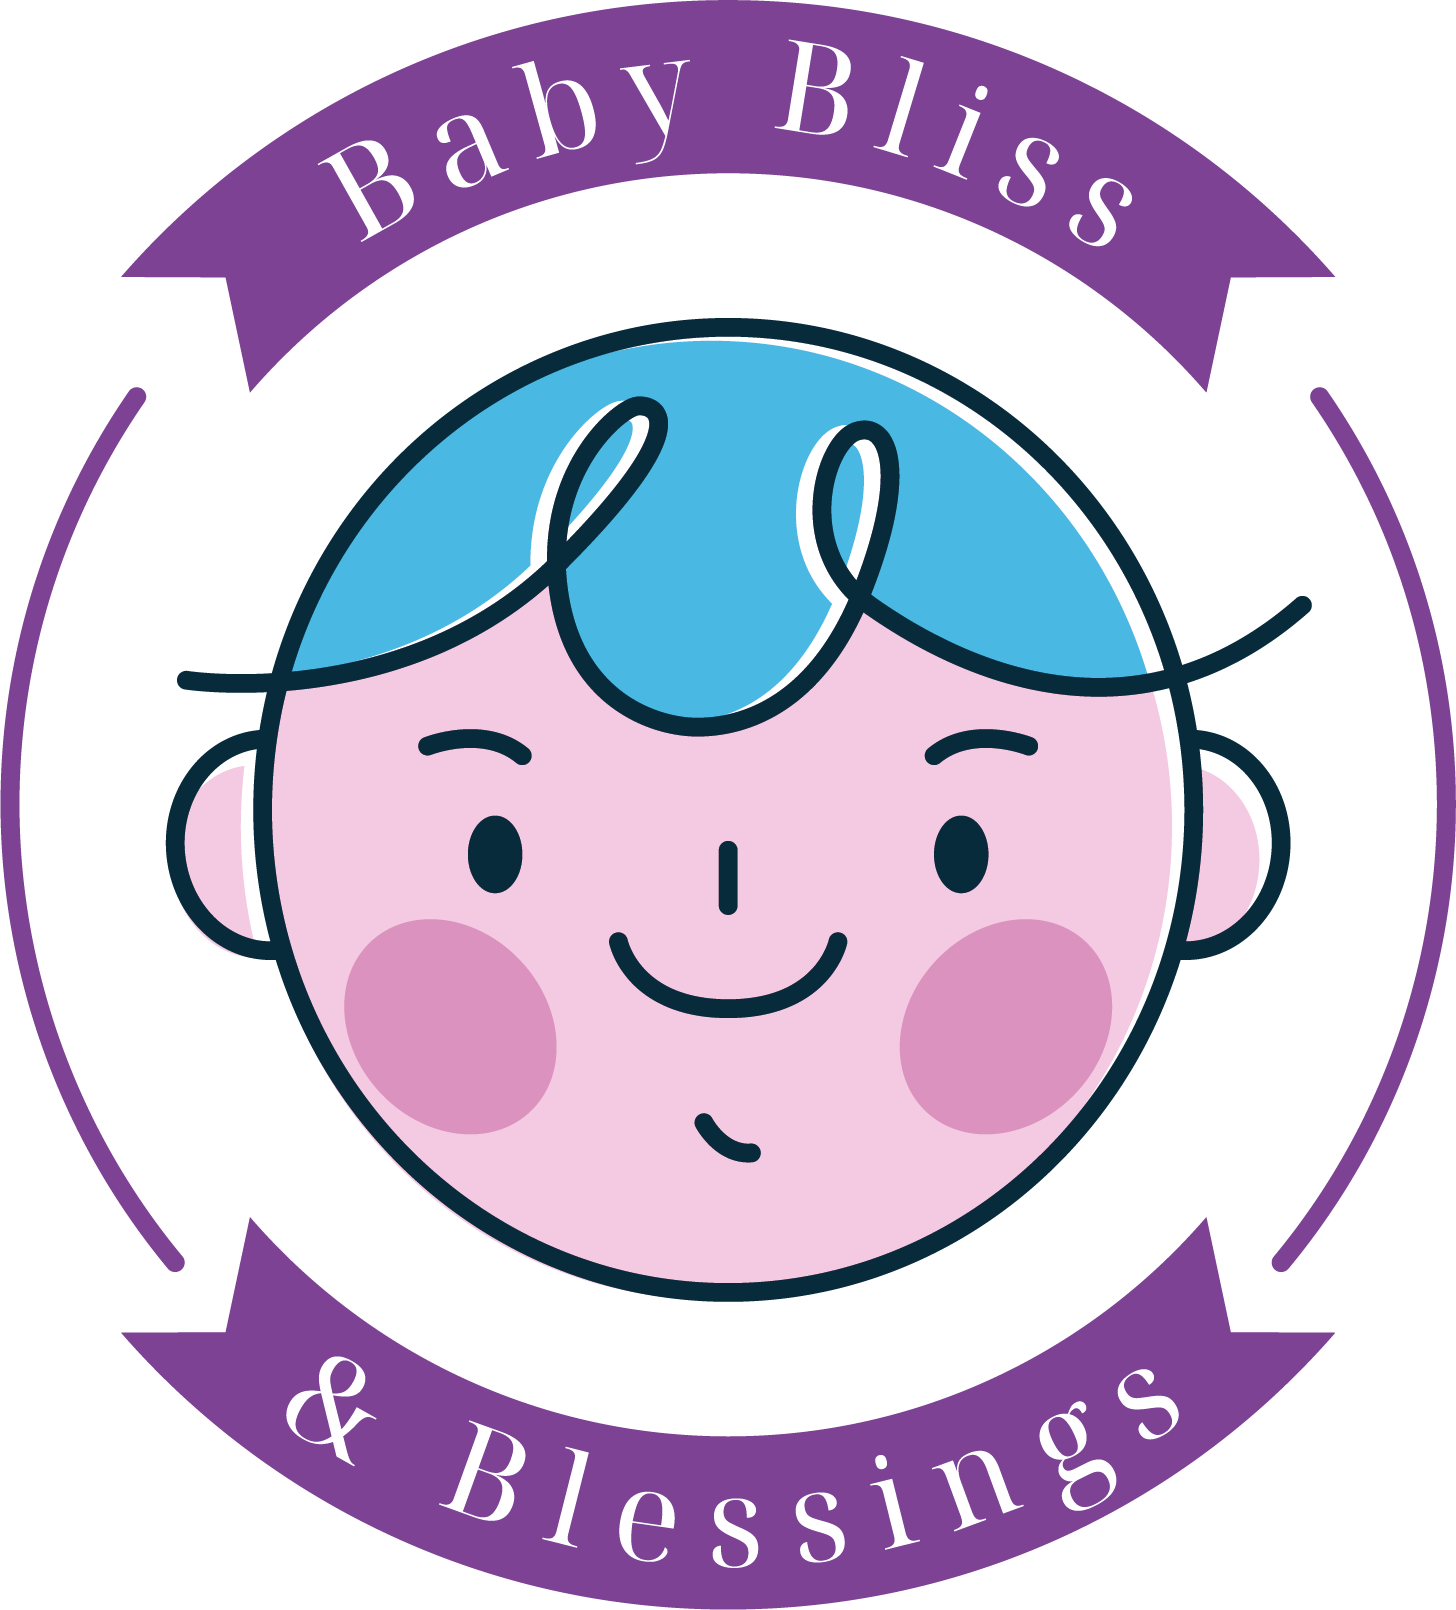 Baby Bliss and Blessings